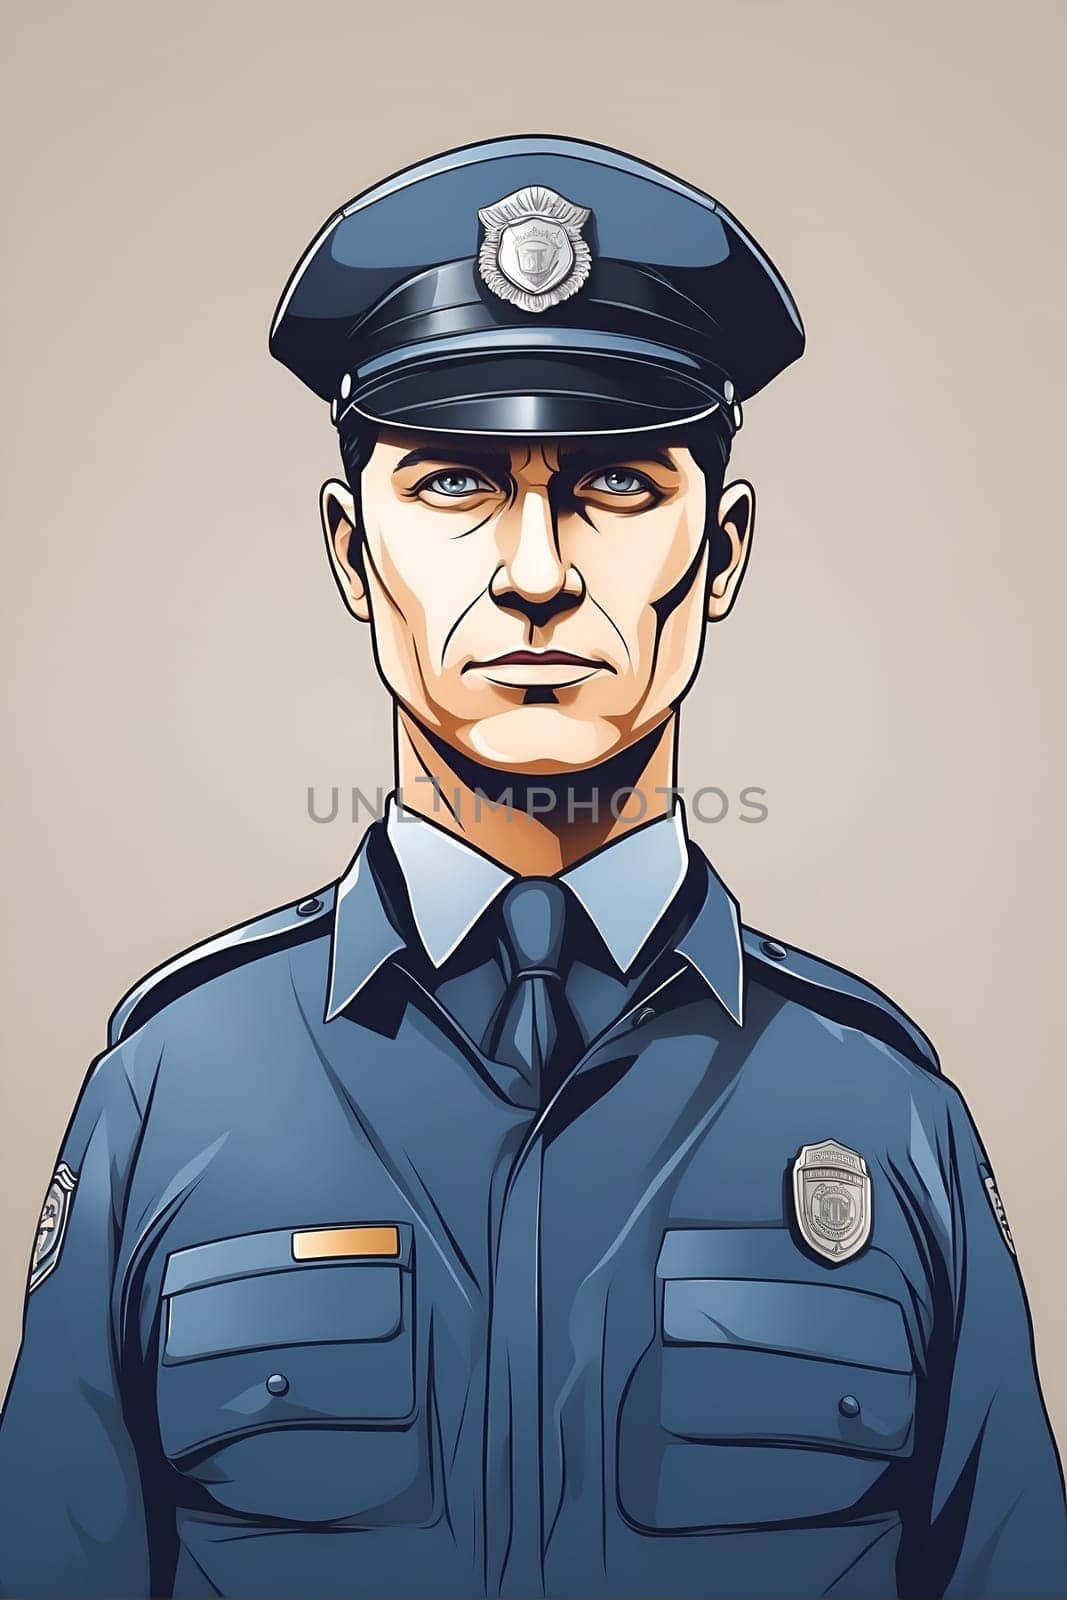 A line drawing of a man in a police uniform, captured with simple yet confident strokes.